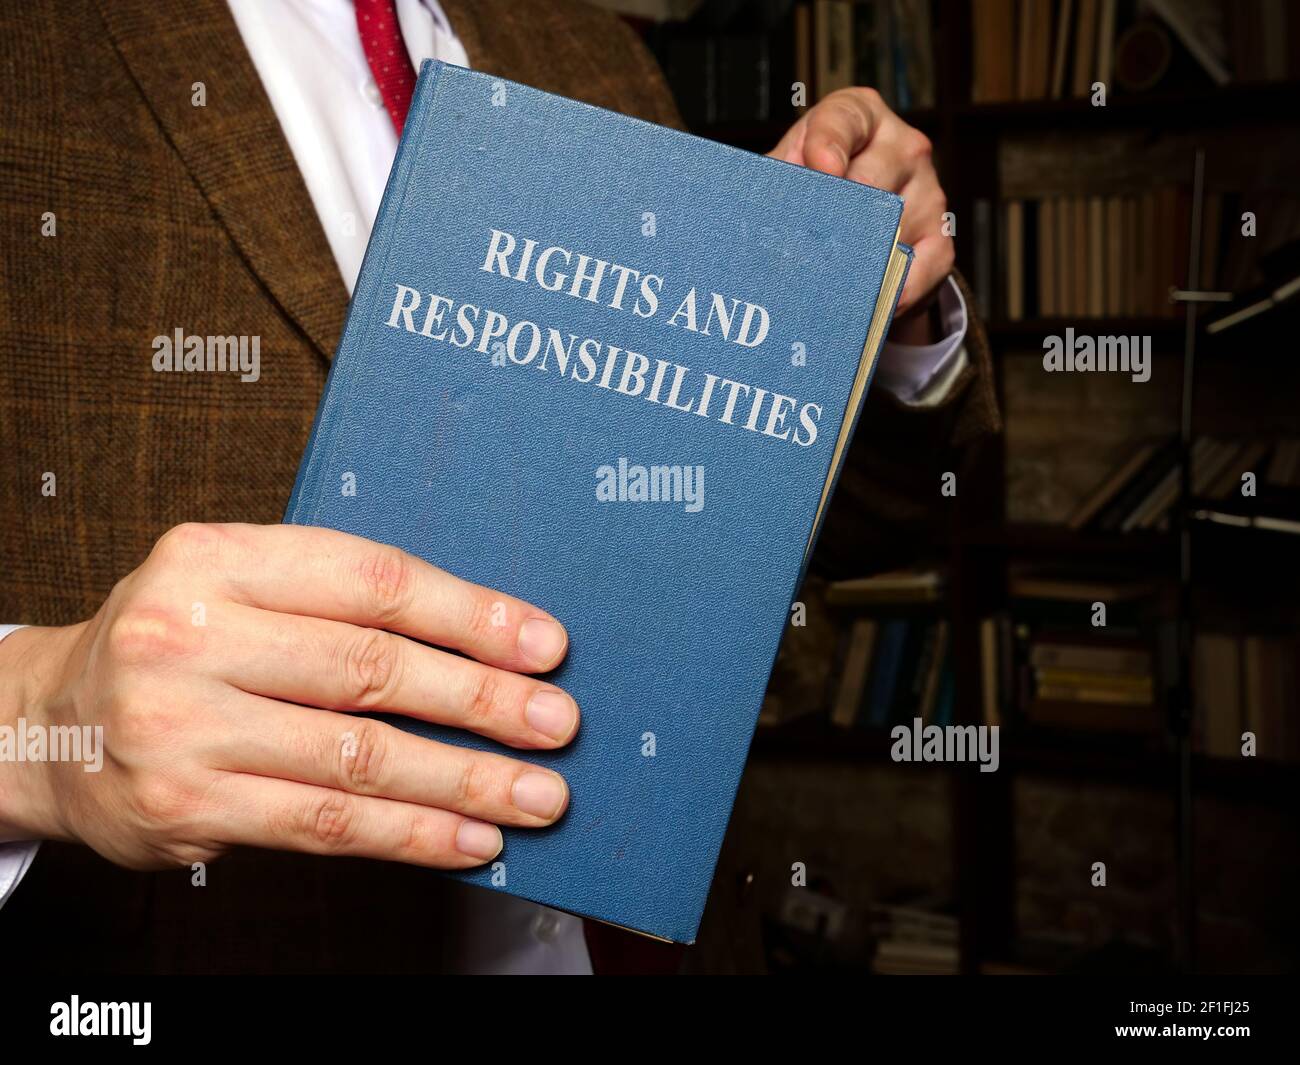 Manager in suit holds rights and responsibilities book. Stock Photo